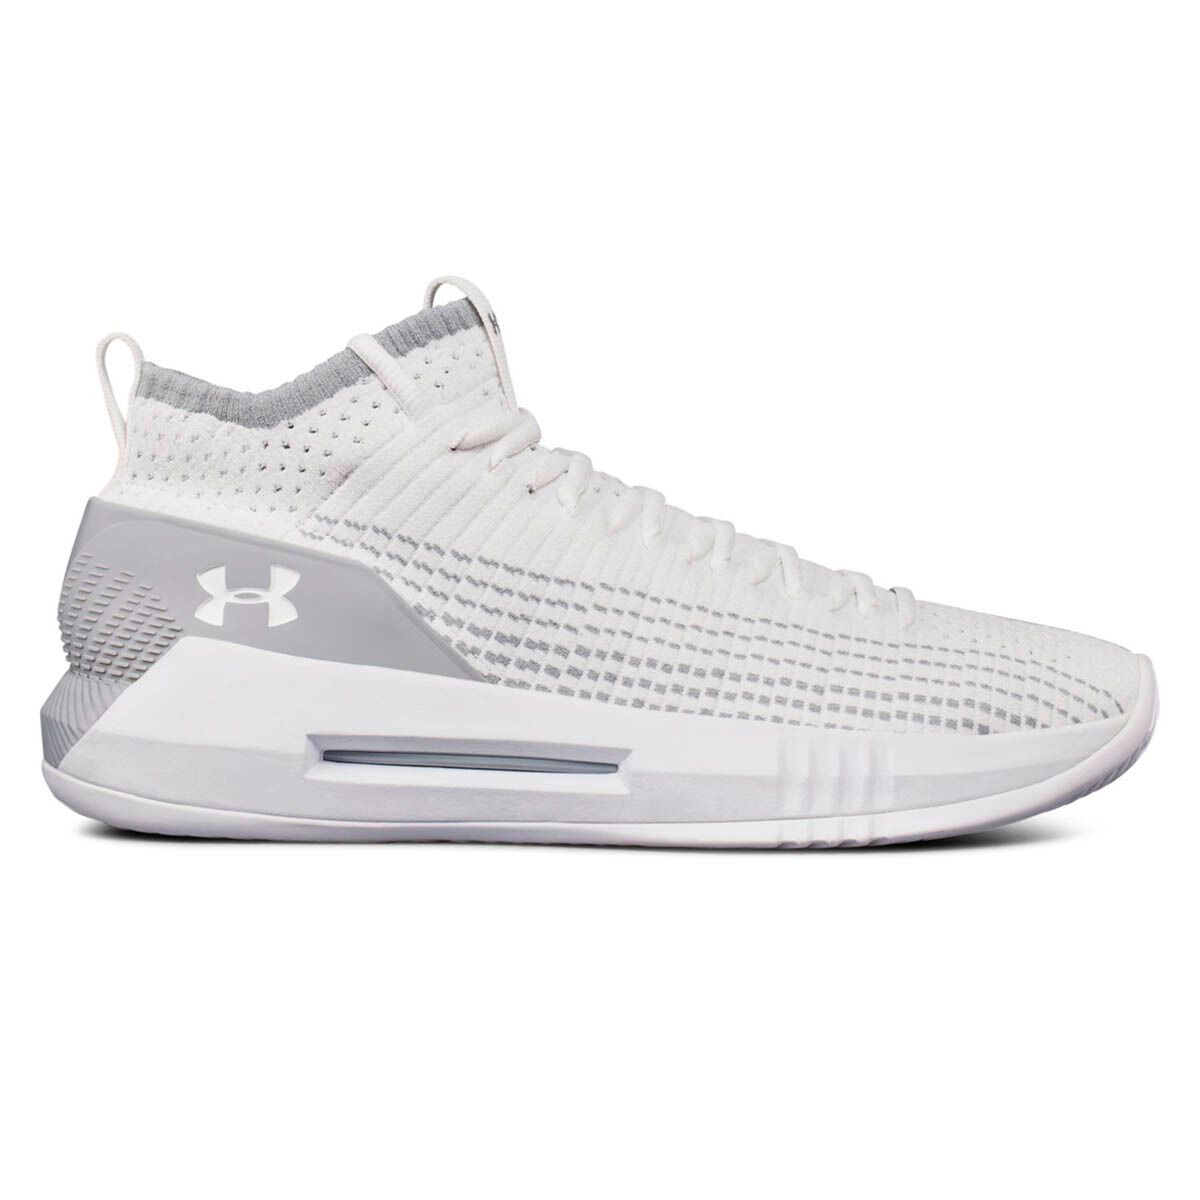 white and gold under armour shoes